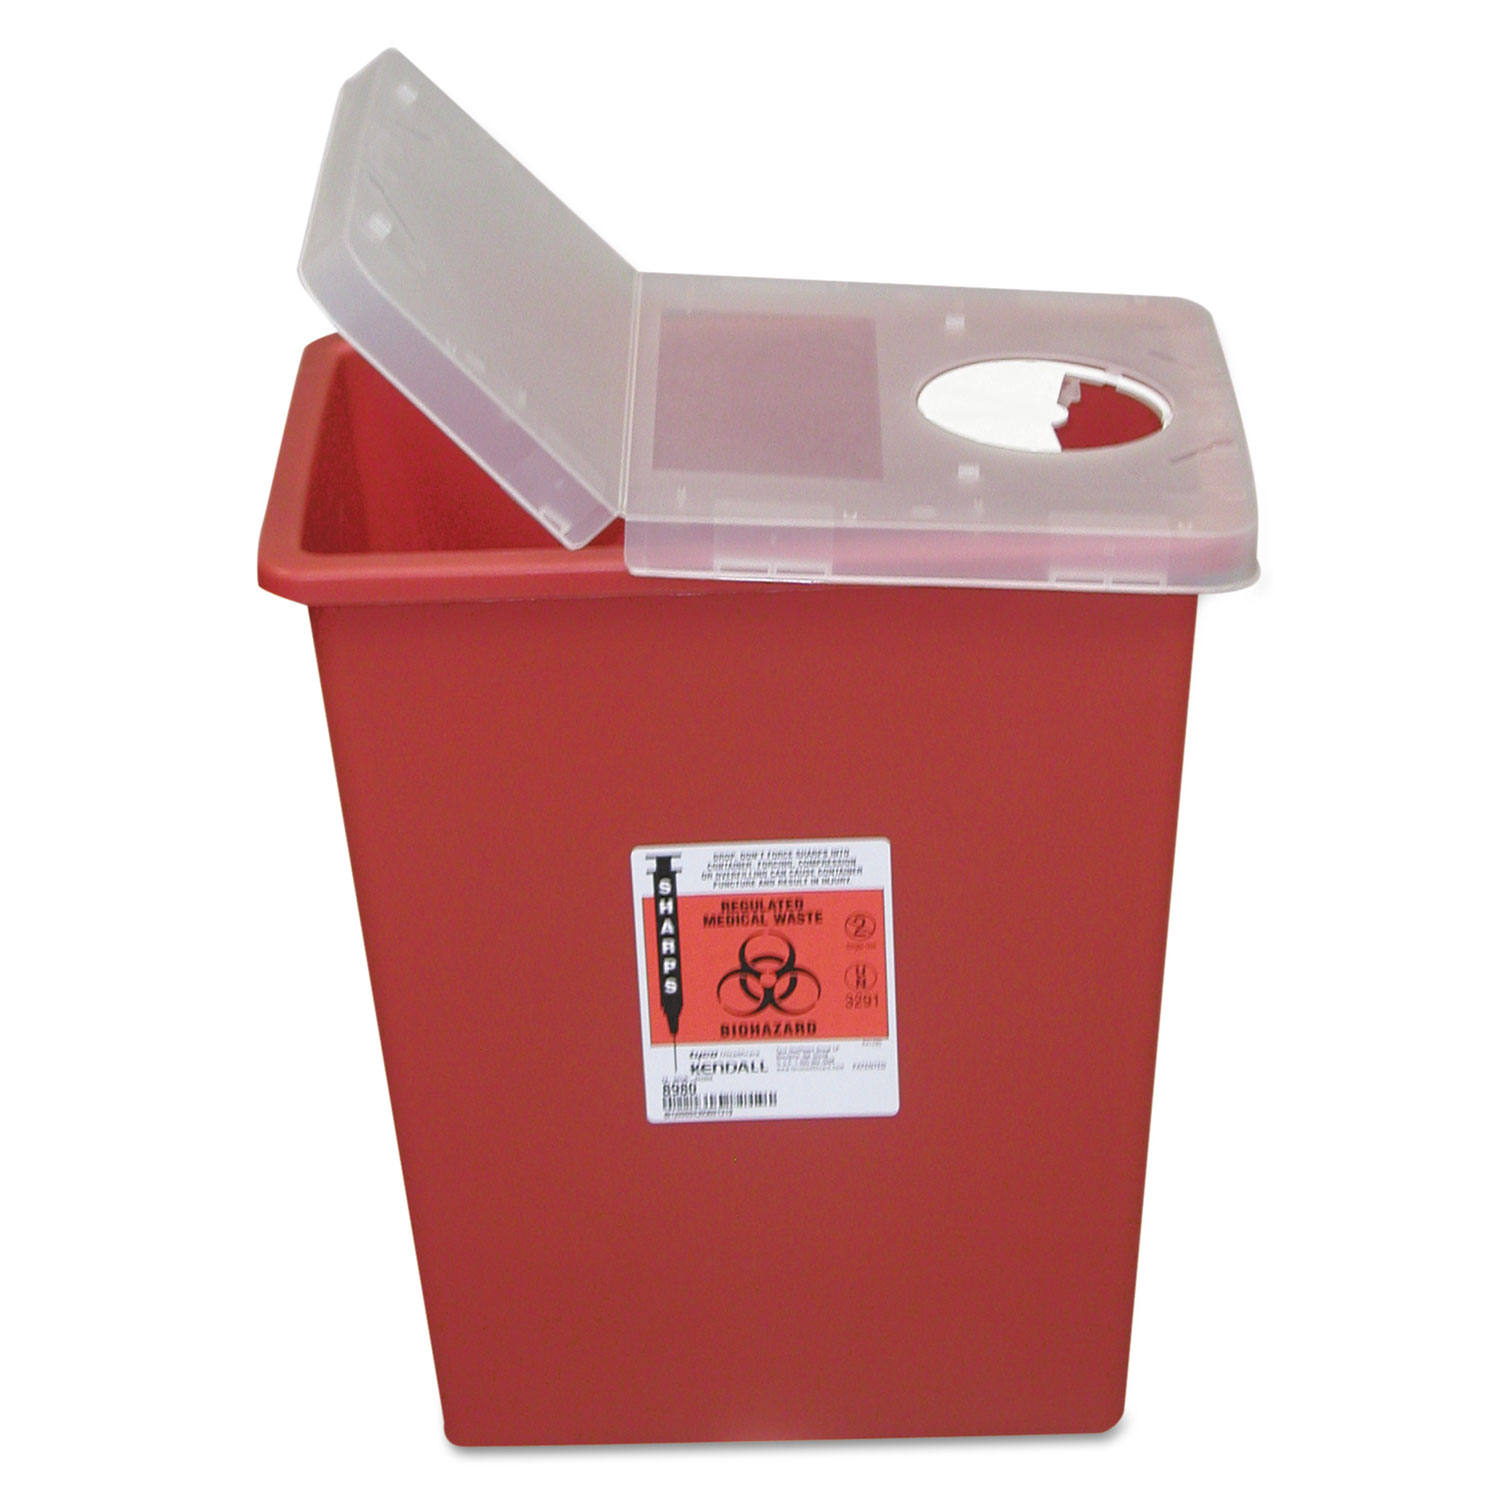 Sharps Containers, Polypropylene, 8 gal, 15 1/2 x 11 x 17 3/4, Red